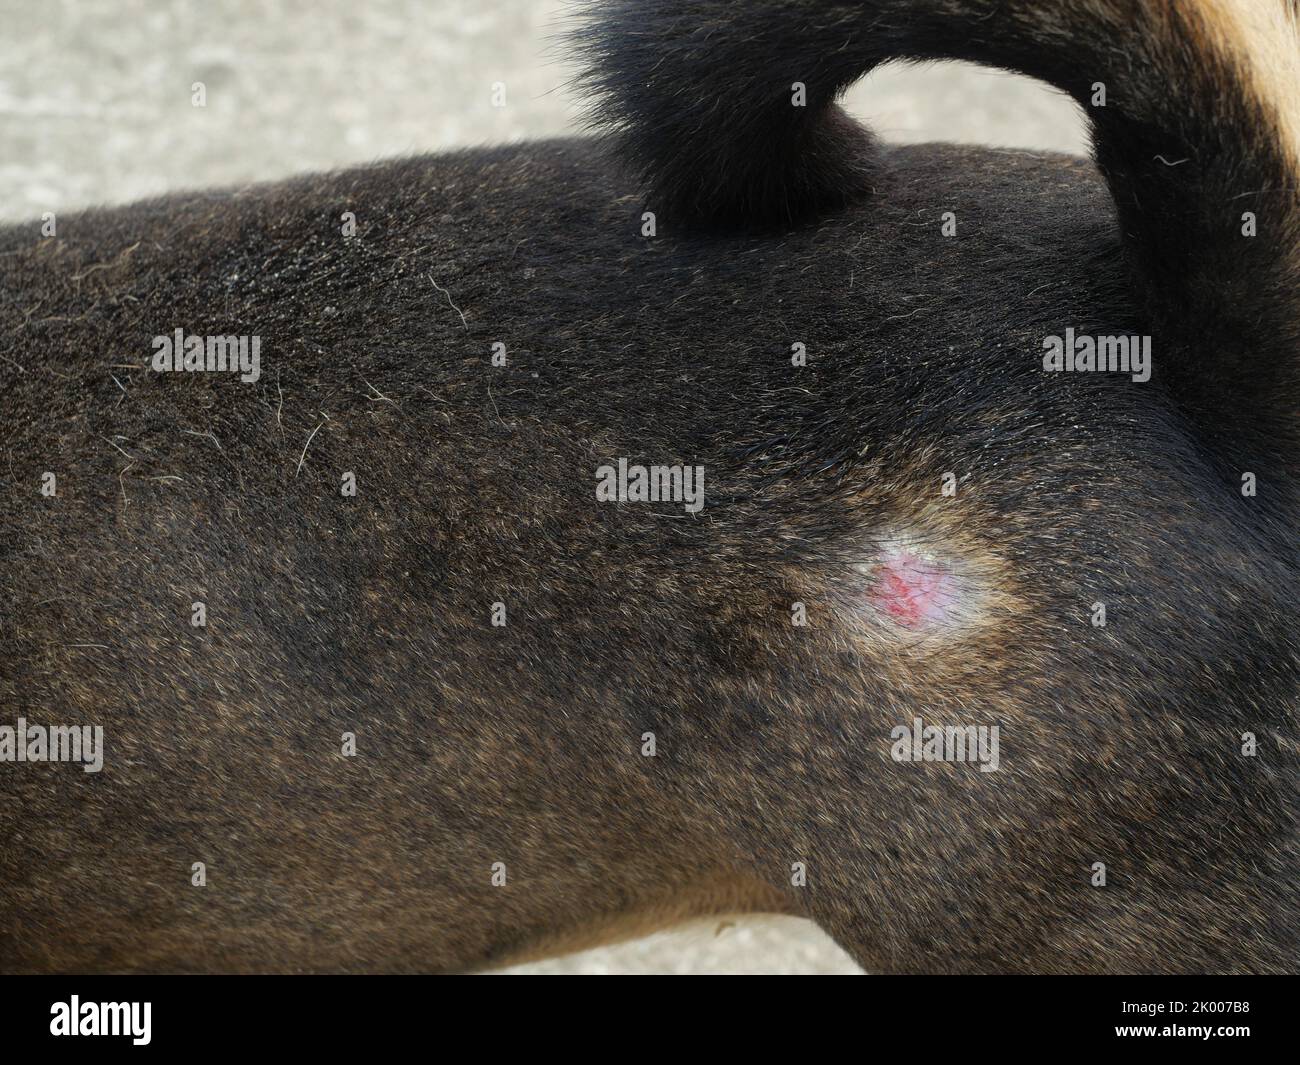 Wound on hip of a black and brown dog, Lesion of scrabies mite or canine mange in pet at skin Stock Photo